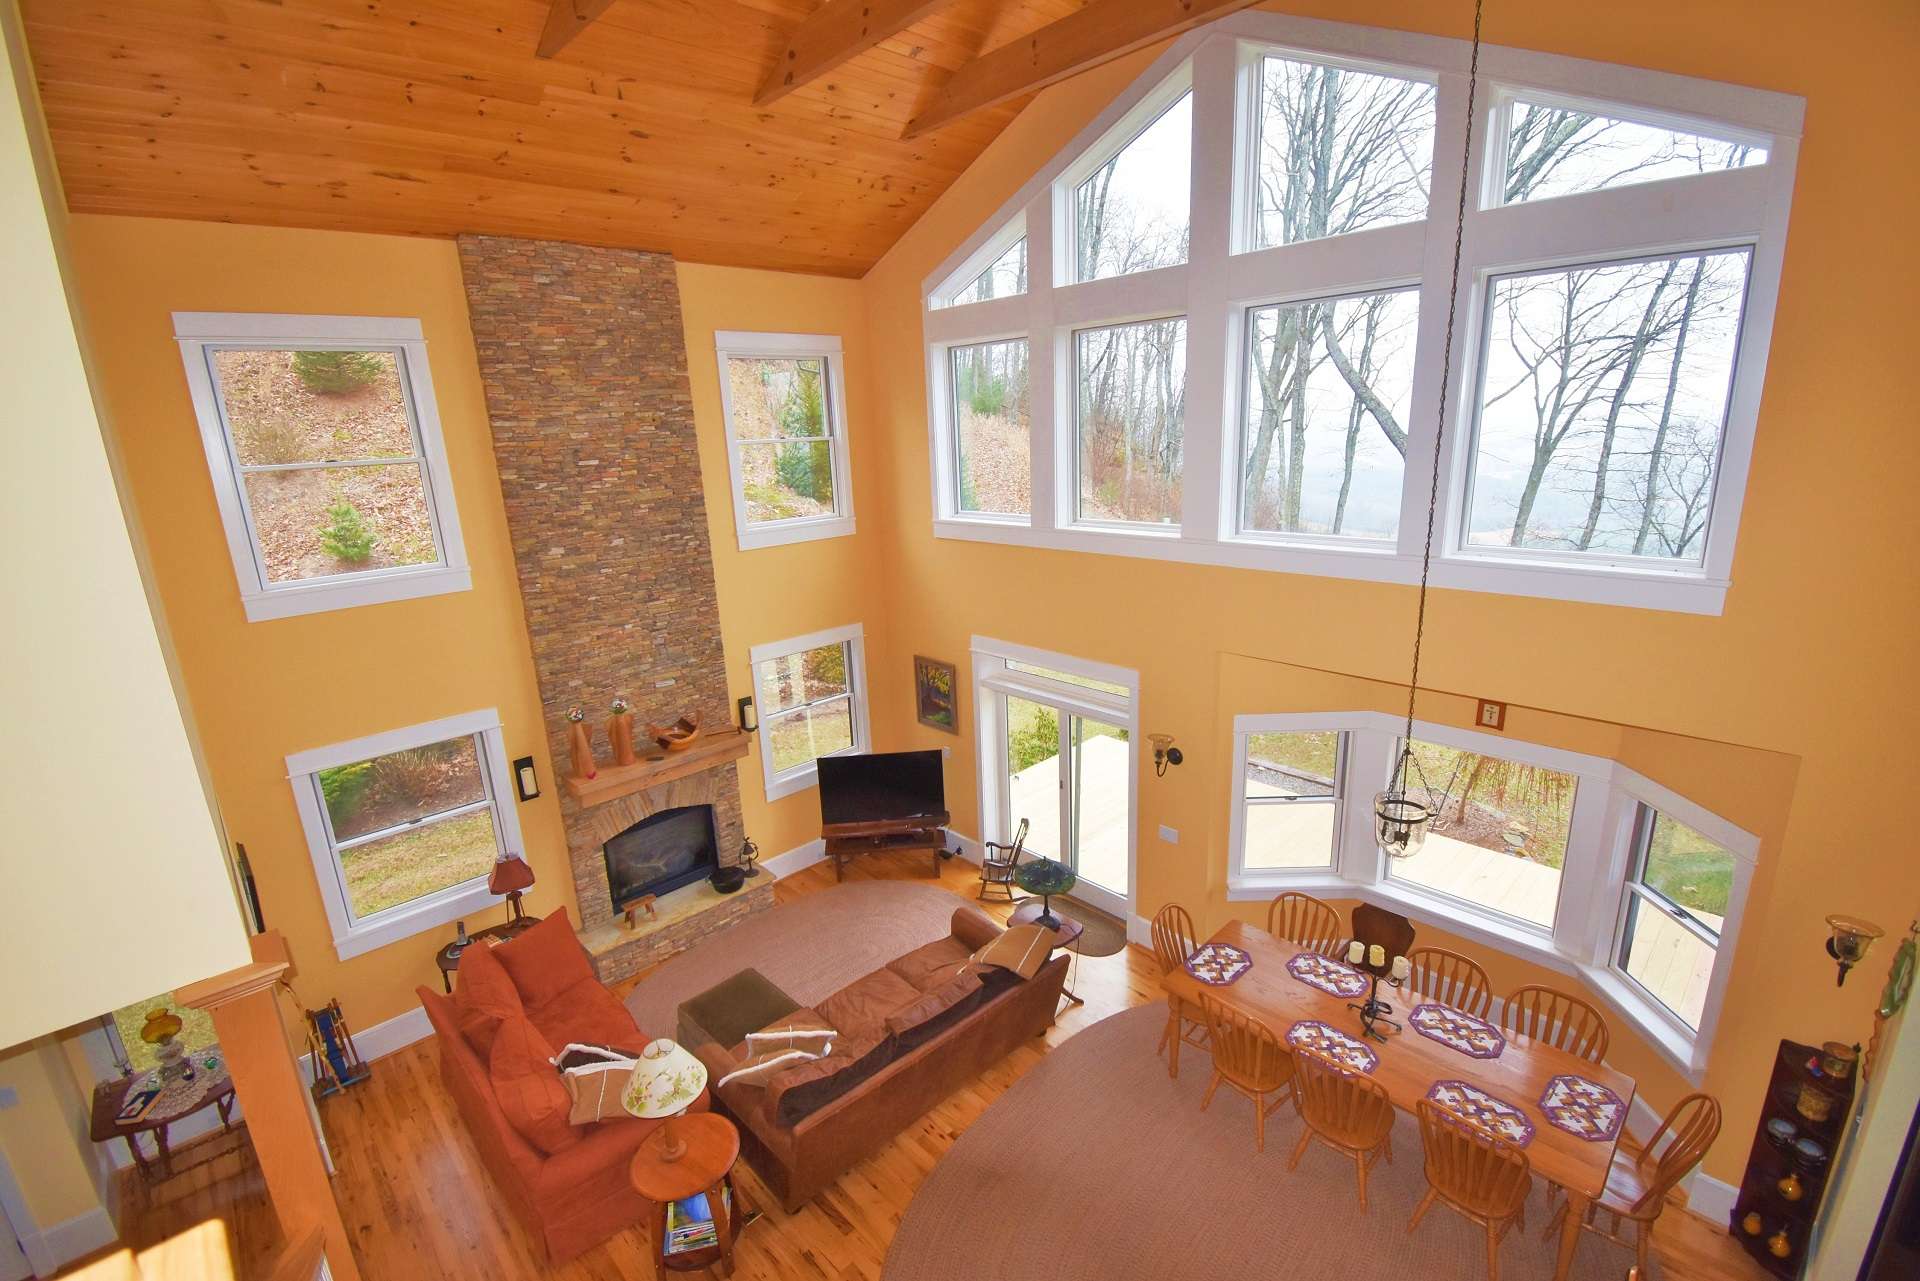 If you enjoy contemporary drama, take a look at this impressive 3-bedroom, 3-bath home filled with custom details. The vaulted great room features lots of windows for natural light, wood floors and ceiling, and a floor to ceiling stone fireplace with gas logs.